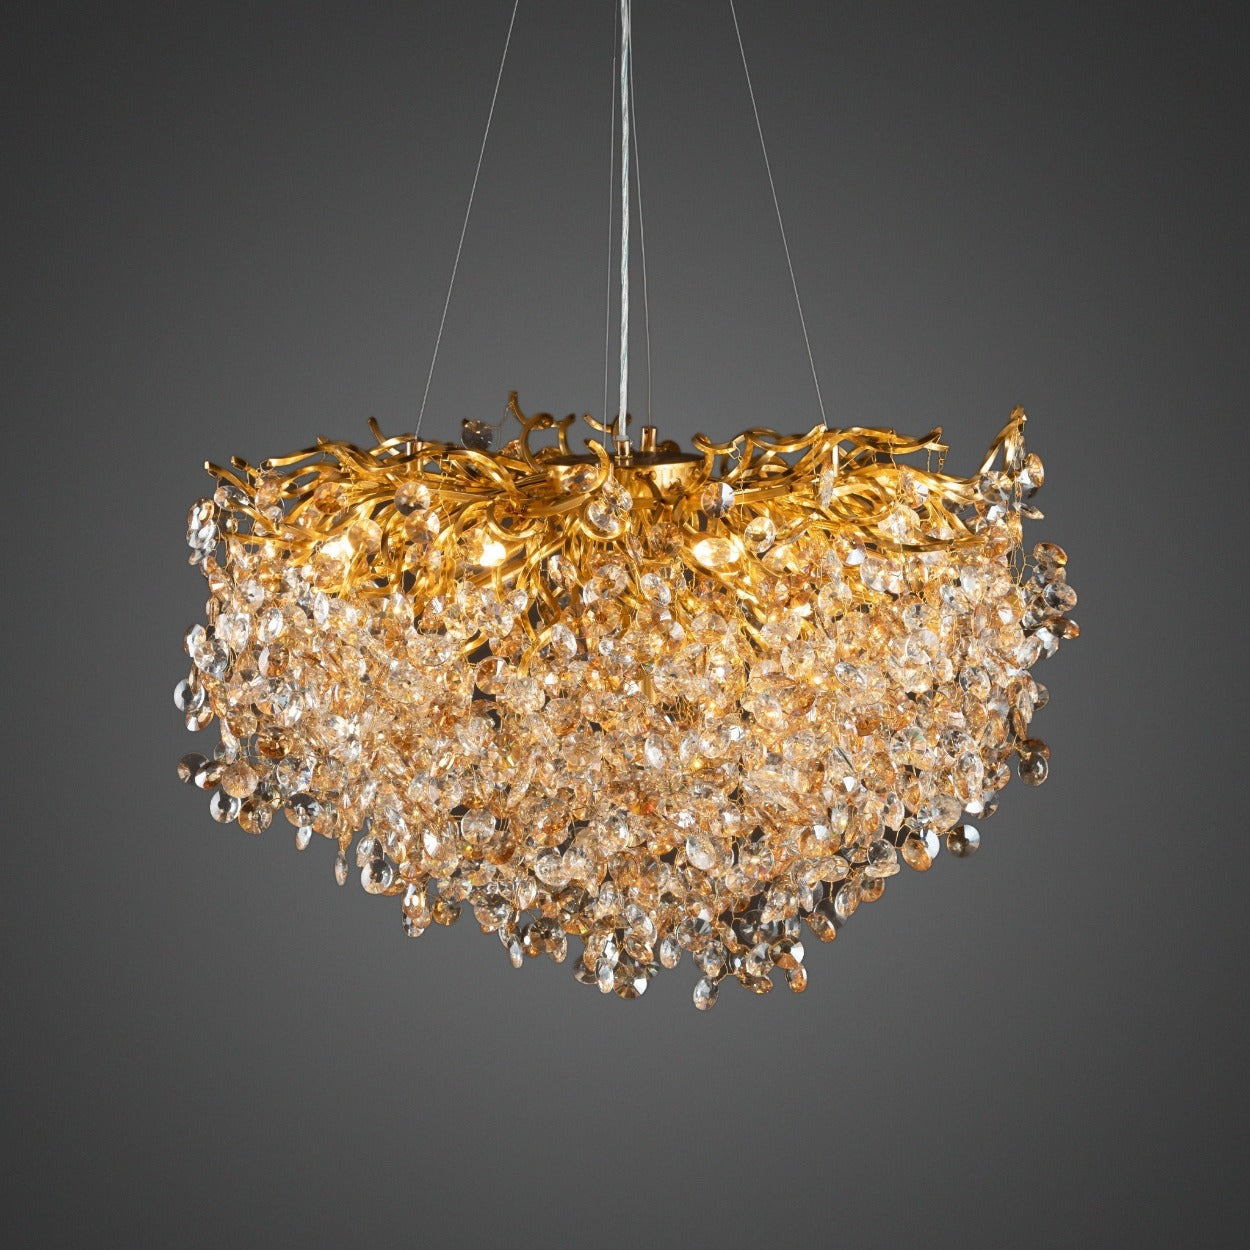 ANKUR ROUND BLOOM CONTEMPORARY CRYSTAL CHANDELIER